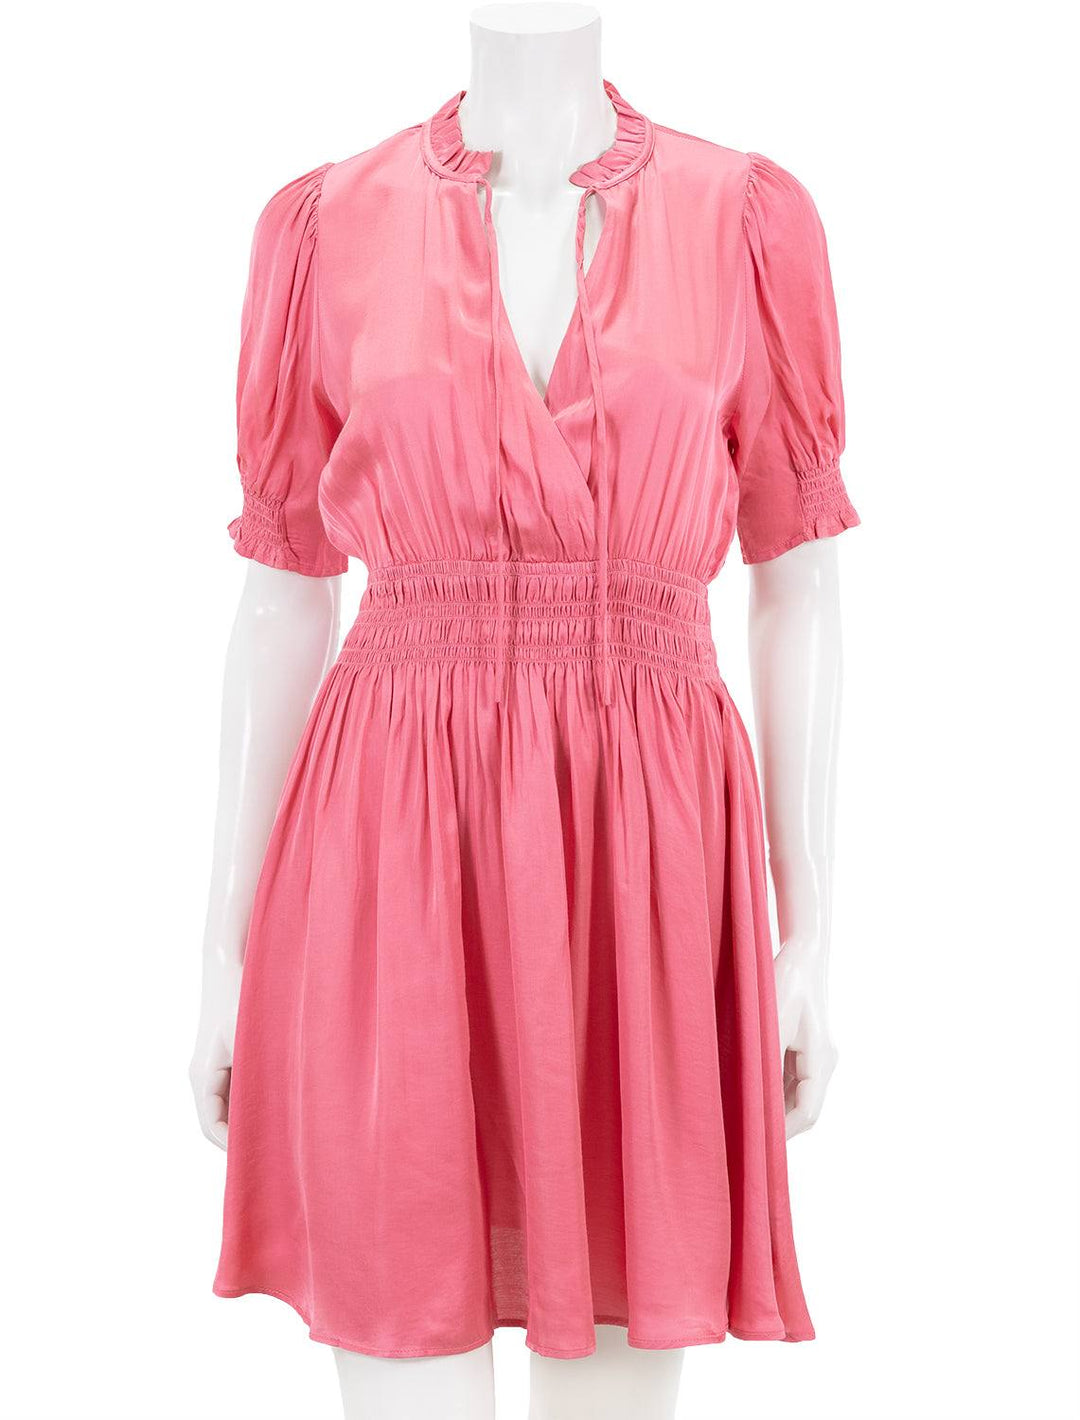 Front view of Suncoo's chaden dress in rose.